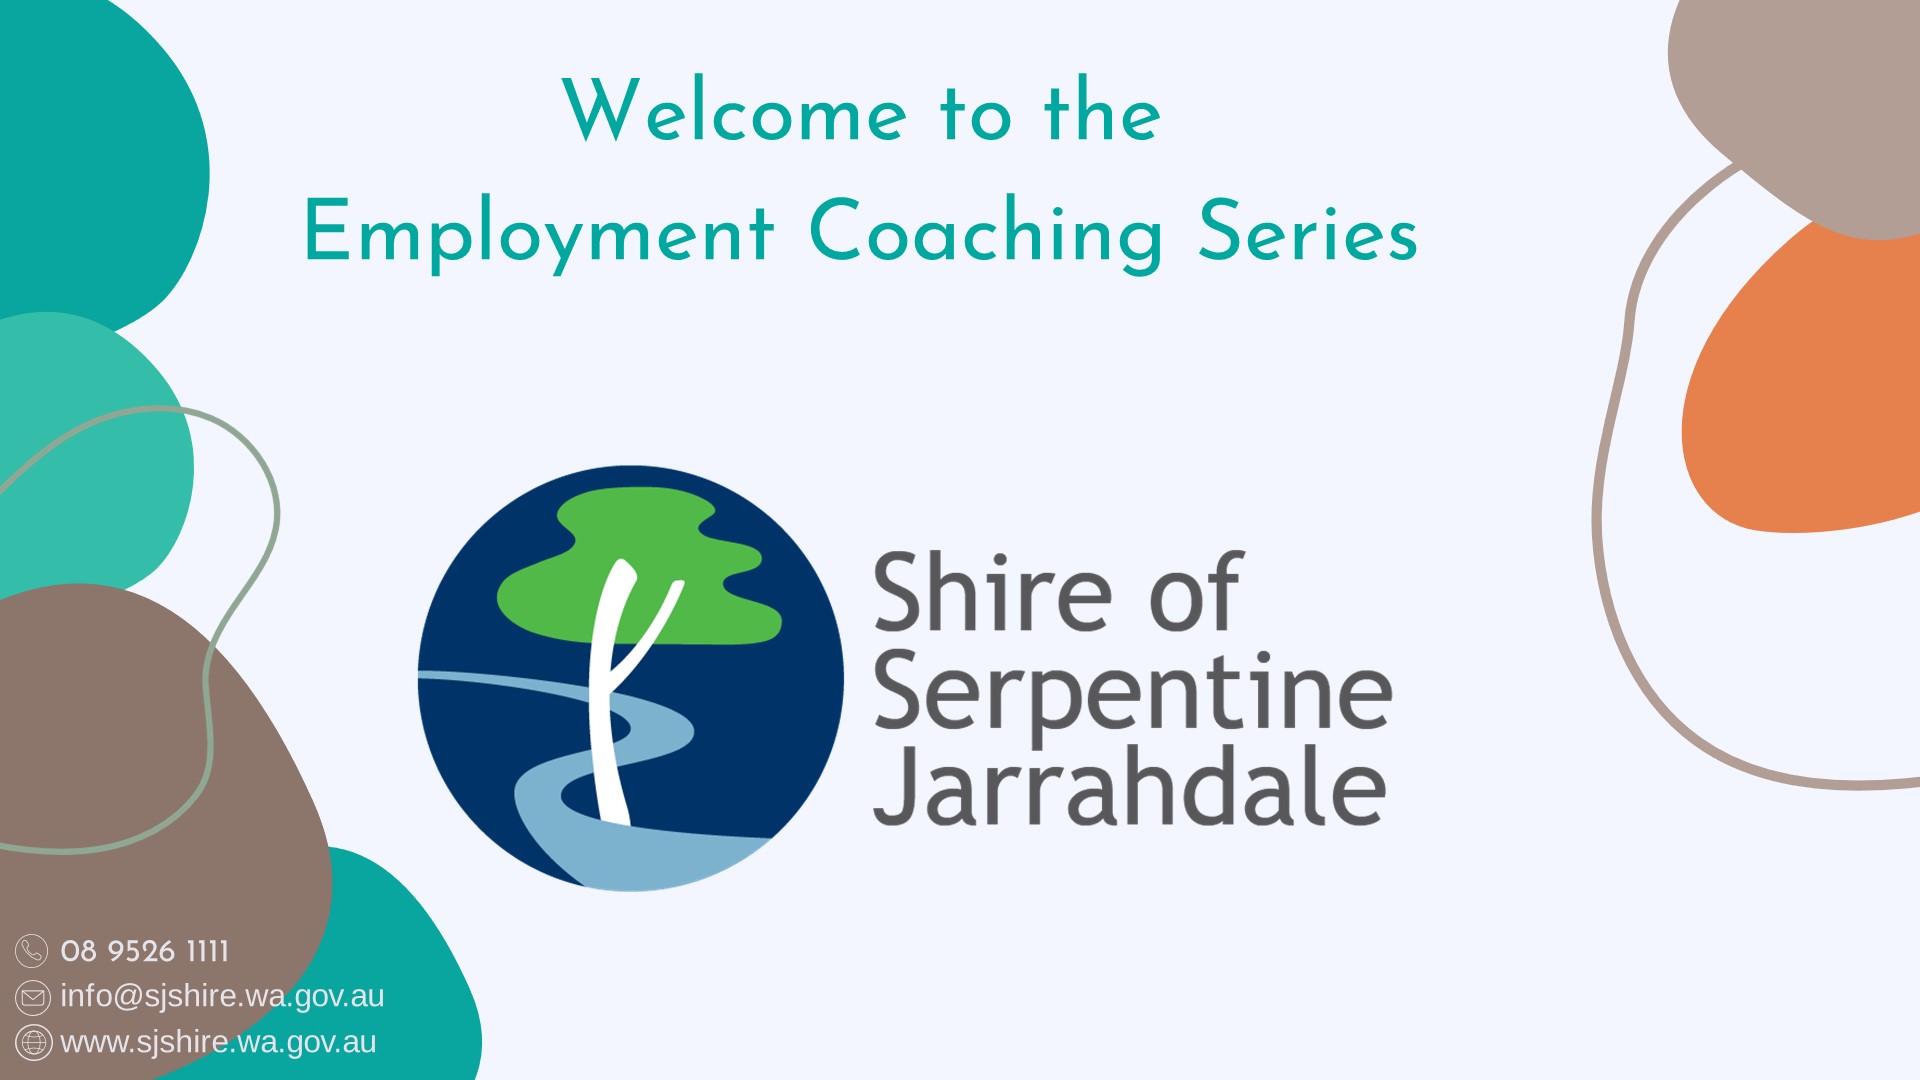 contains text: Welcome to the Employment Coaching Series